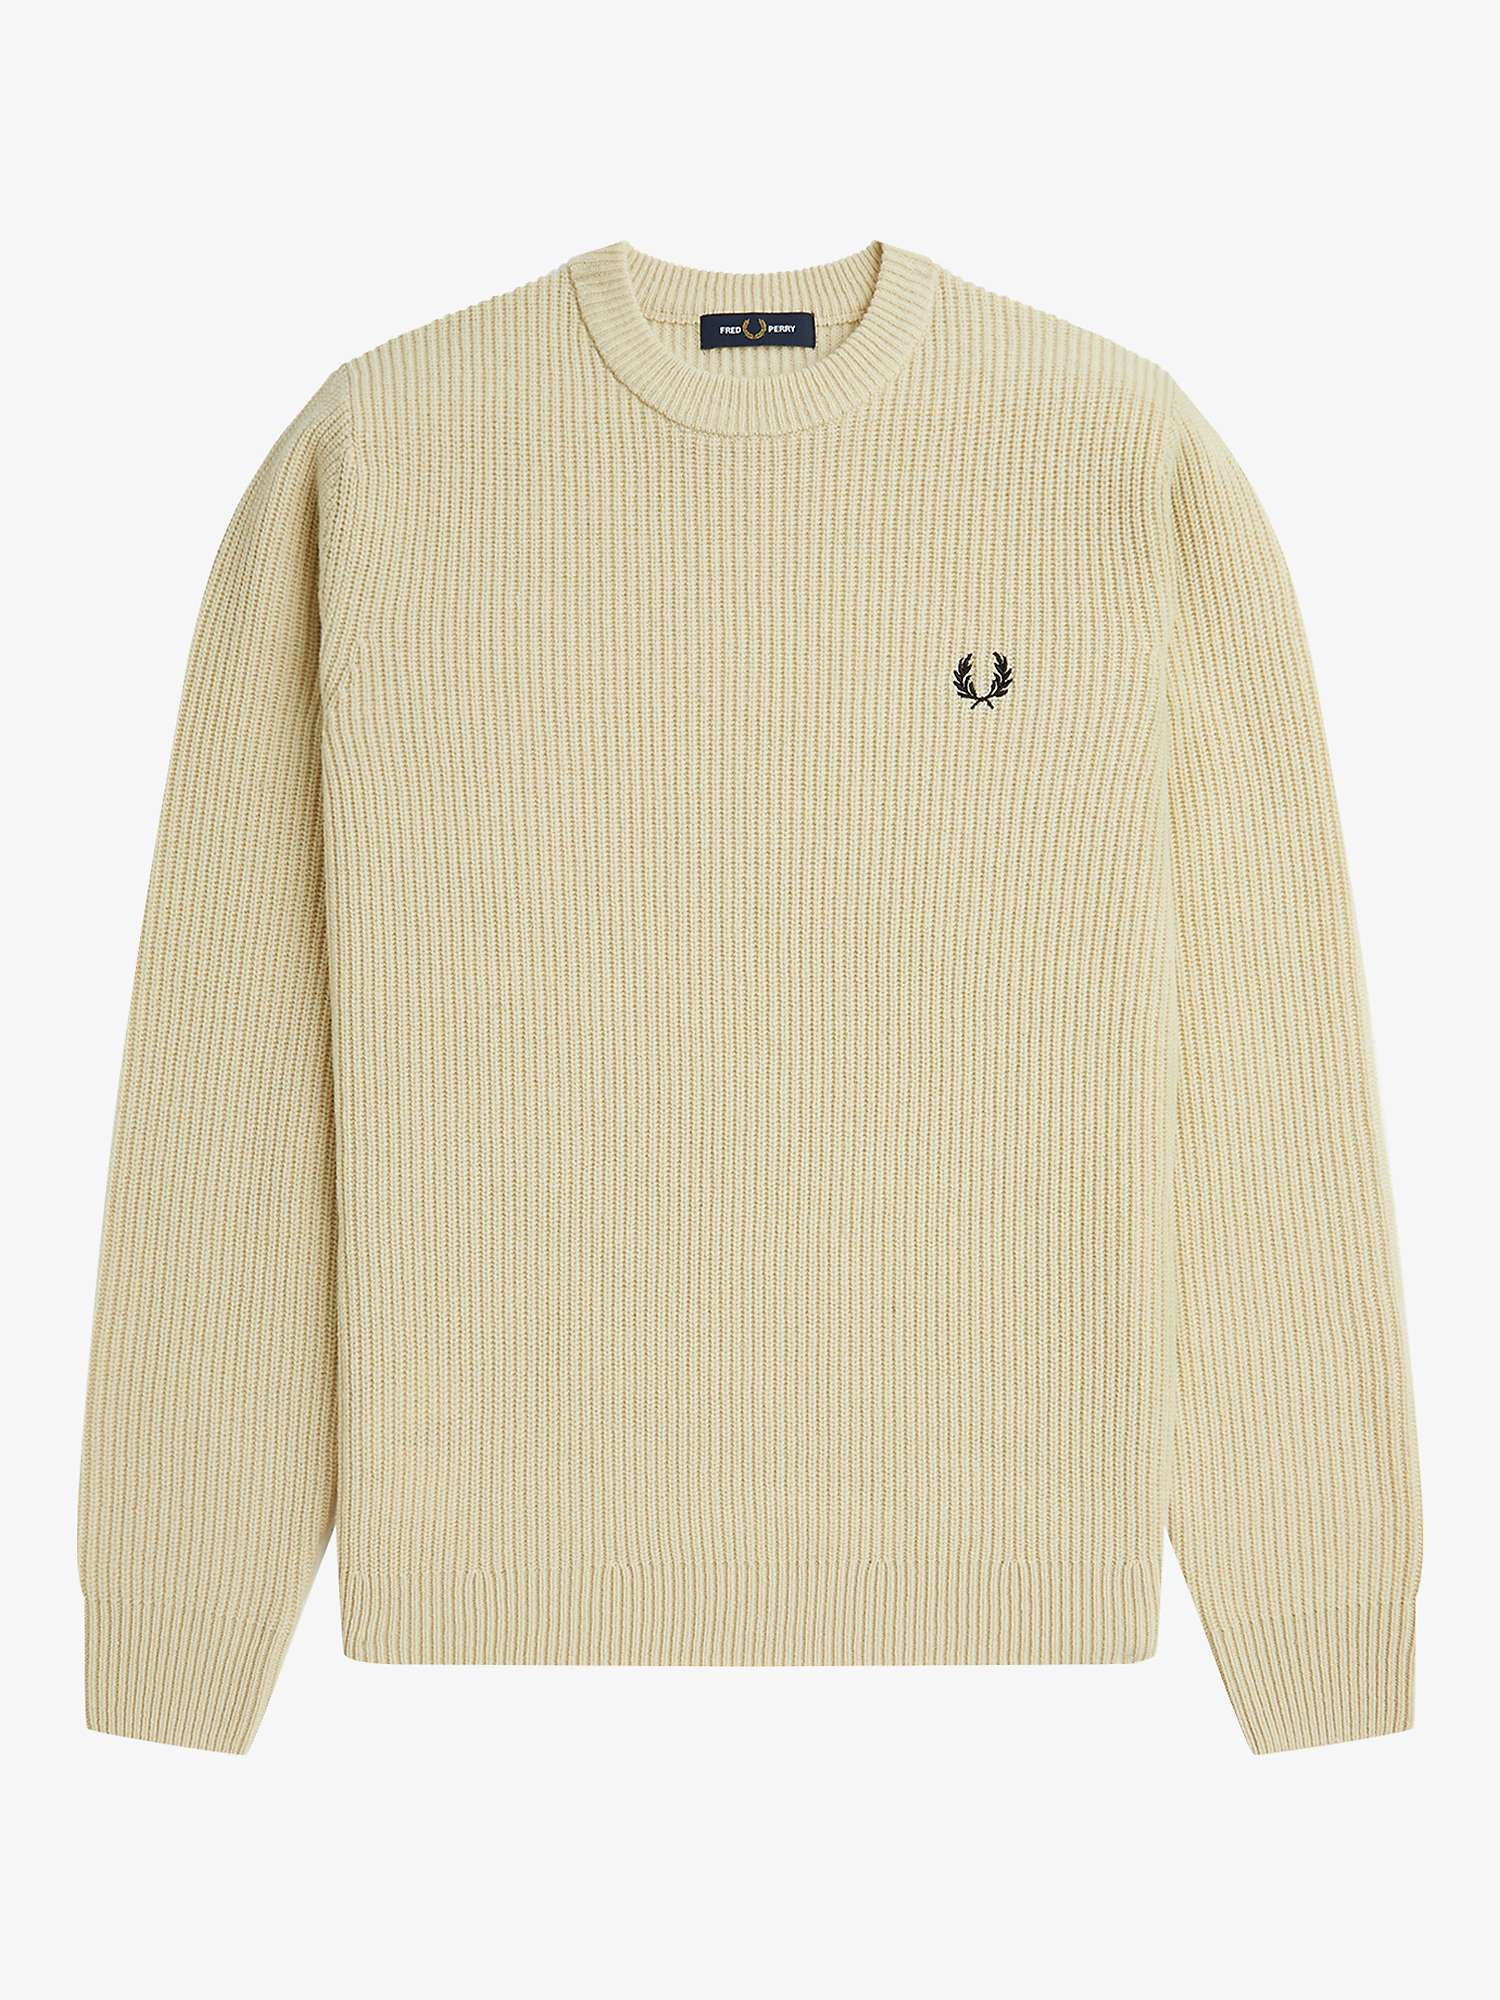 Buy Fred Perry Textured Lambswool Rib Knit Jumper, Oatmeal Online at johnlewis.com